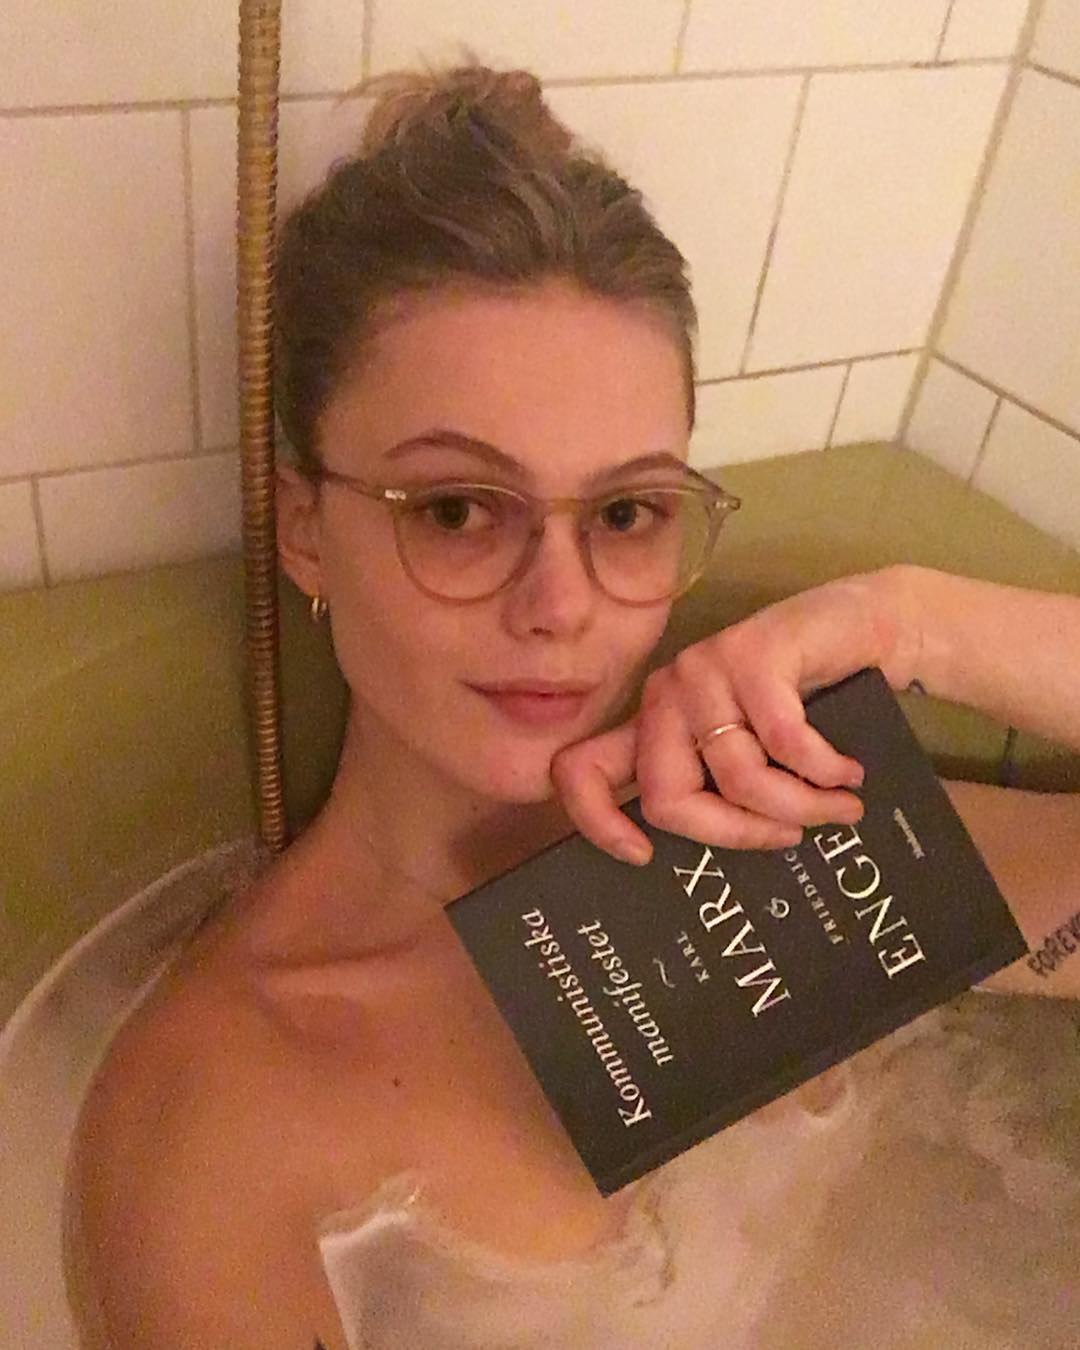 Frida Gustavsson flaunting what seems to be a gold engagement ring in March 2018